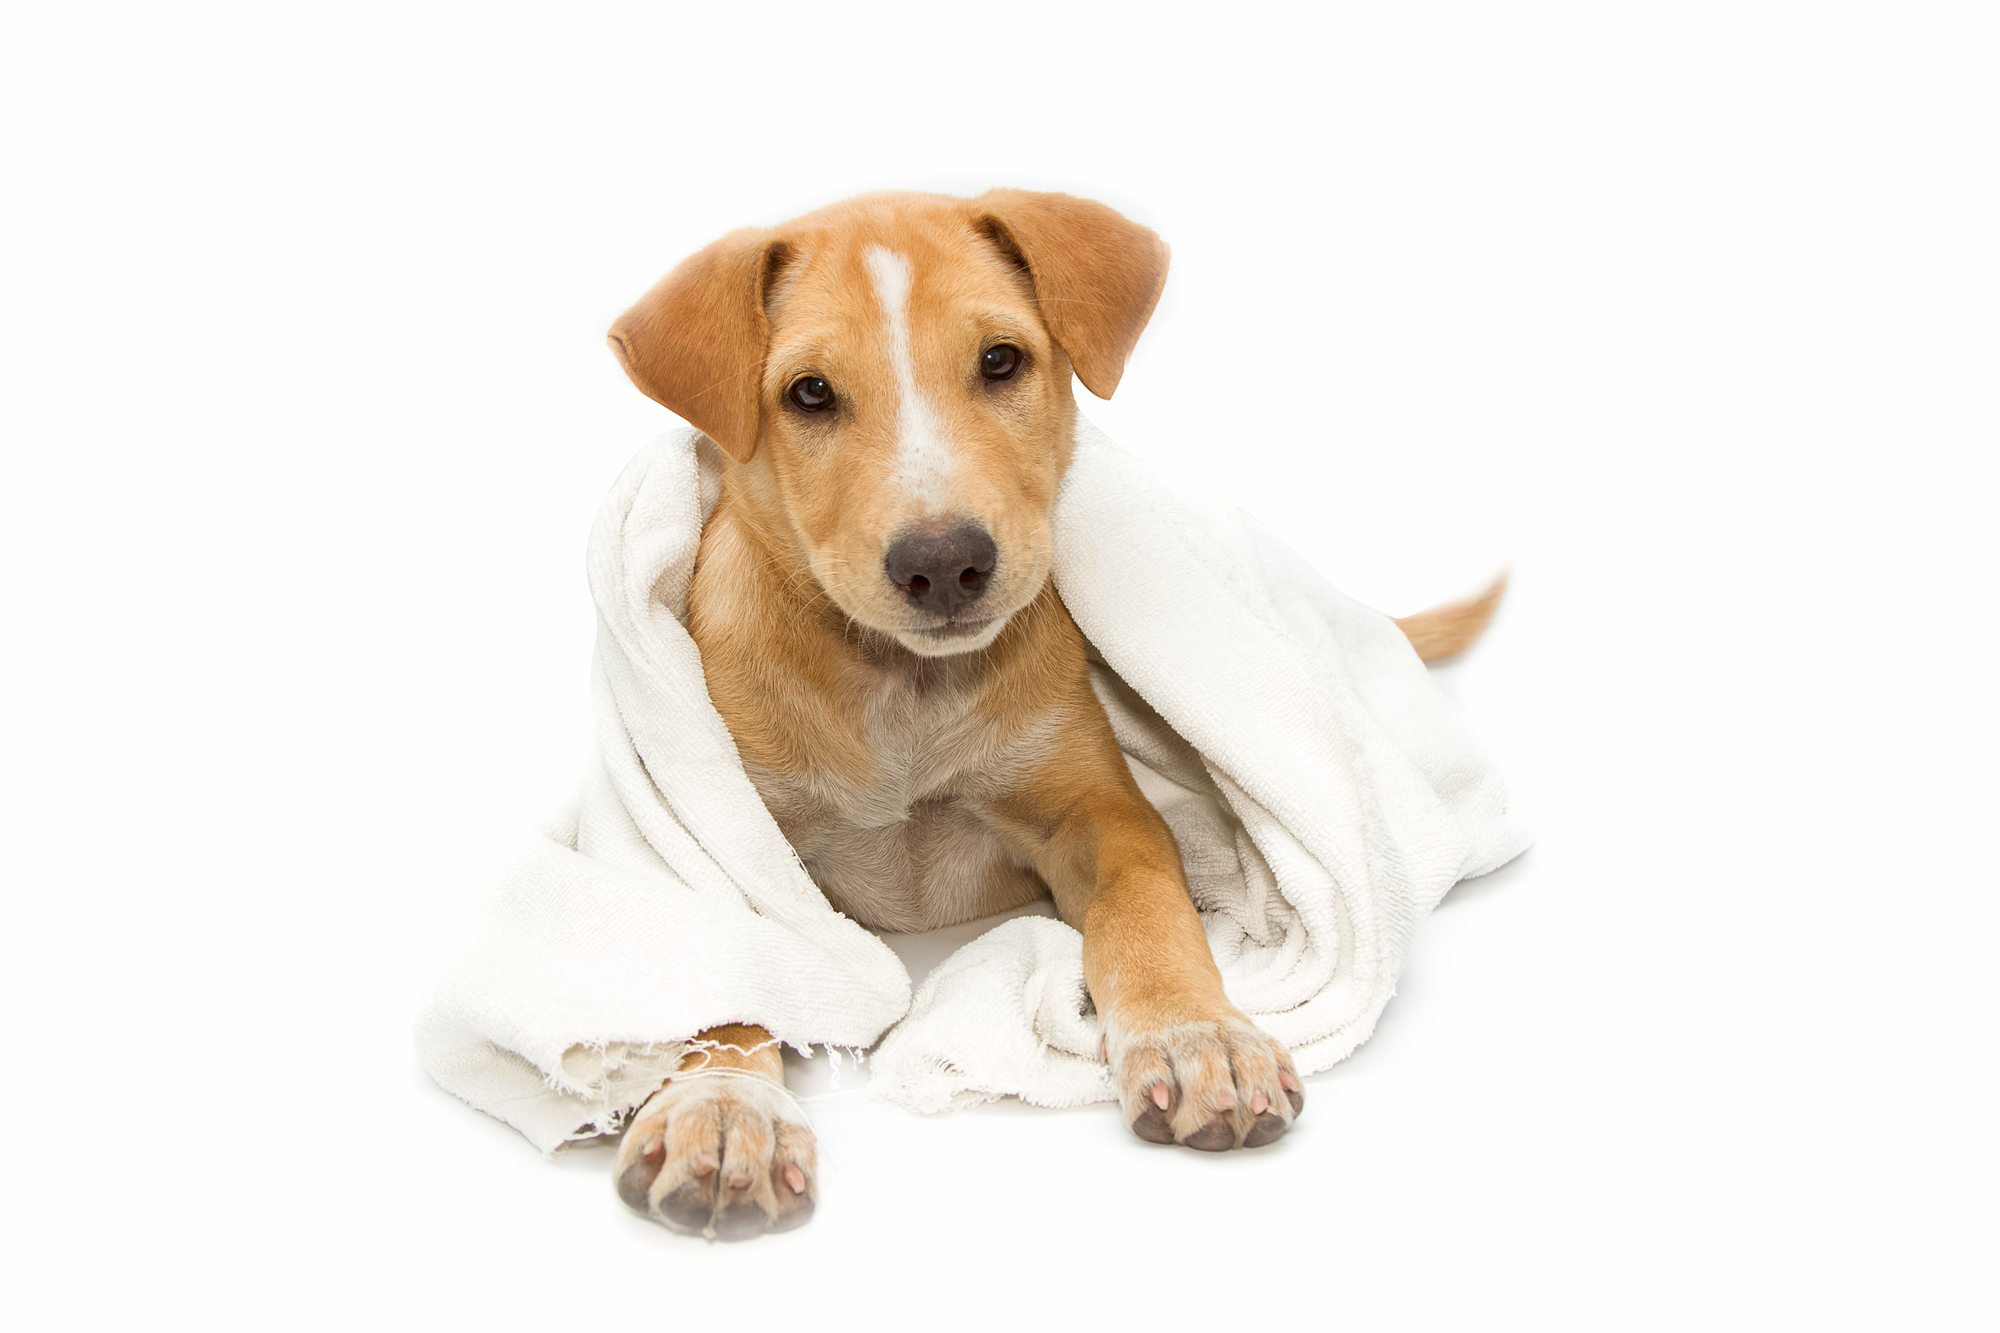 sick dog under a blanket, isolated on white